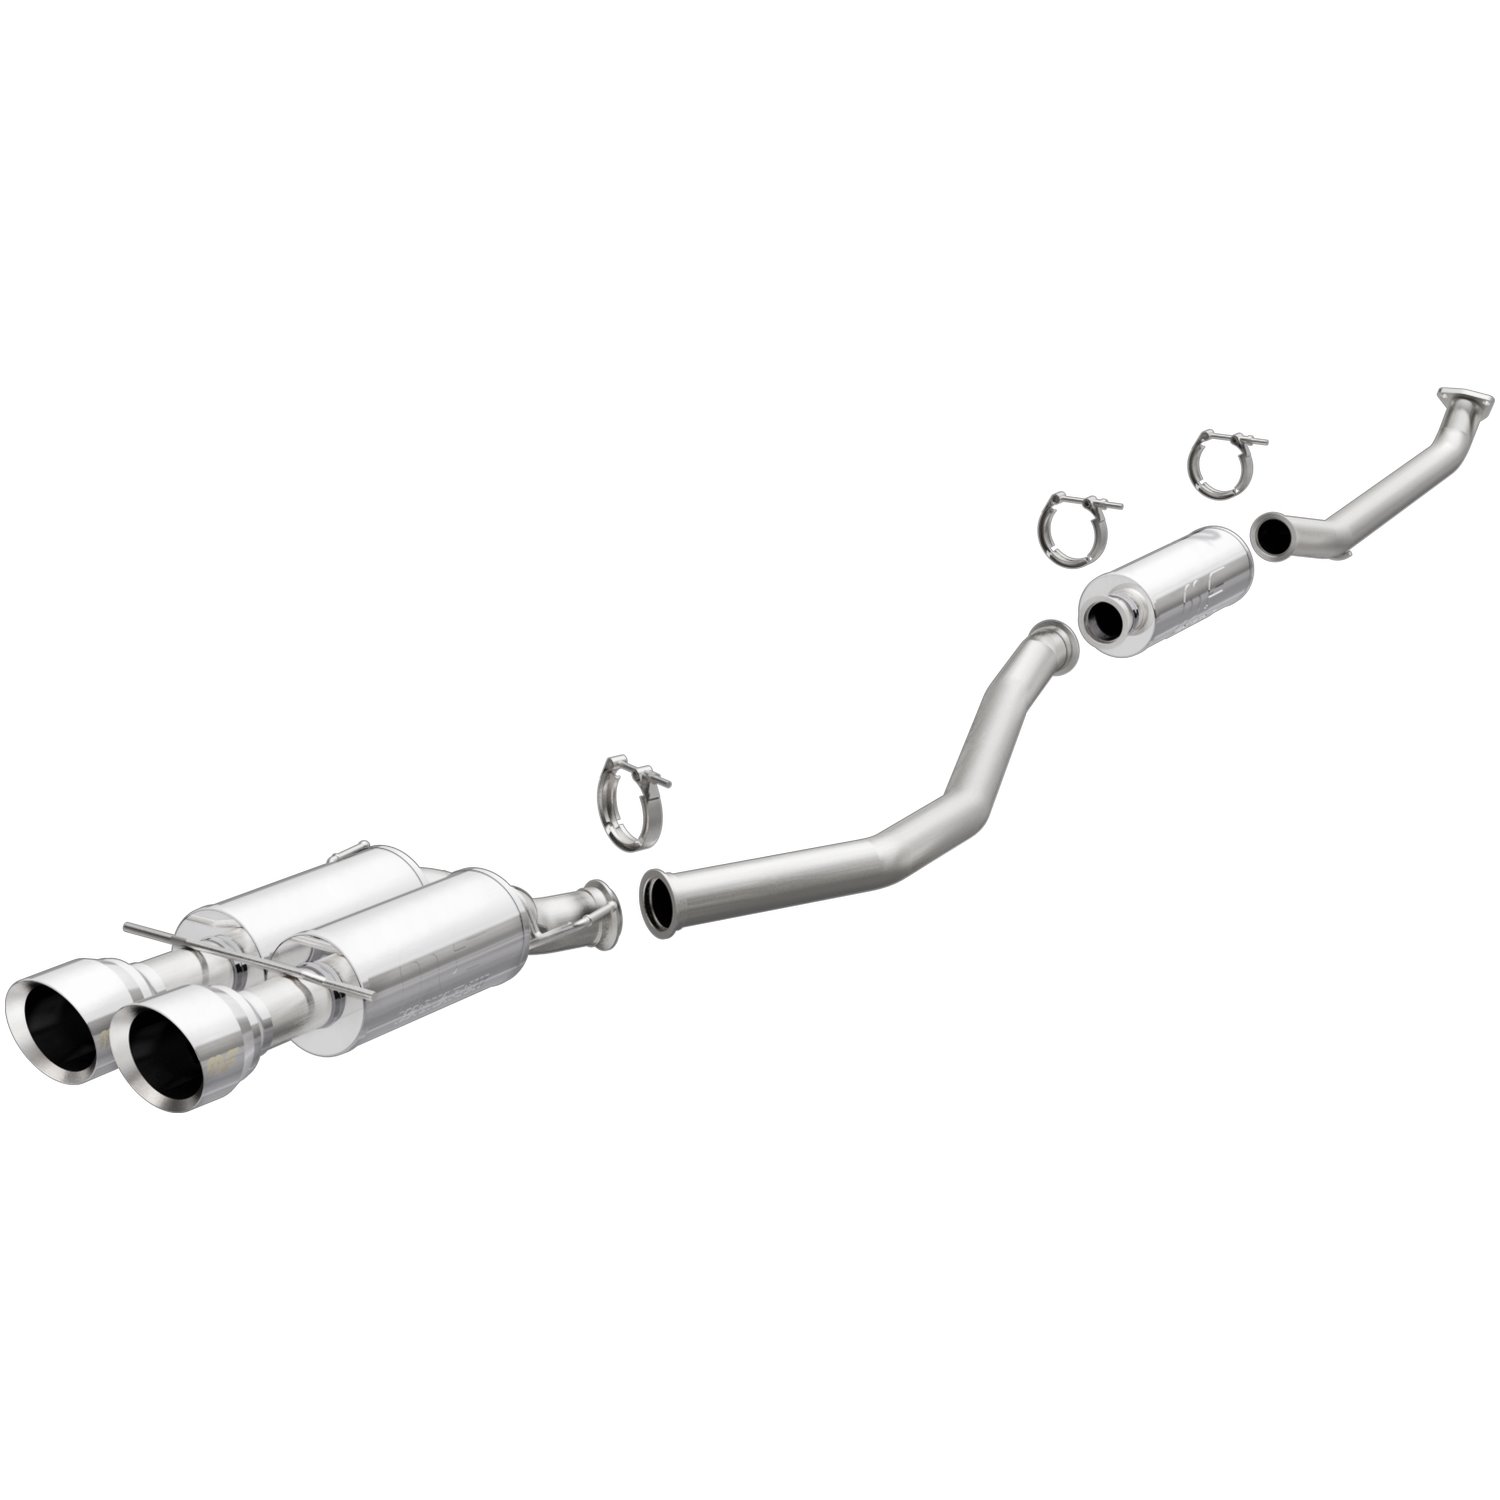 2017-2020 Honda Civic Competition Series Cat-Back Performance Exhaust System